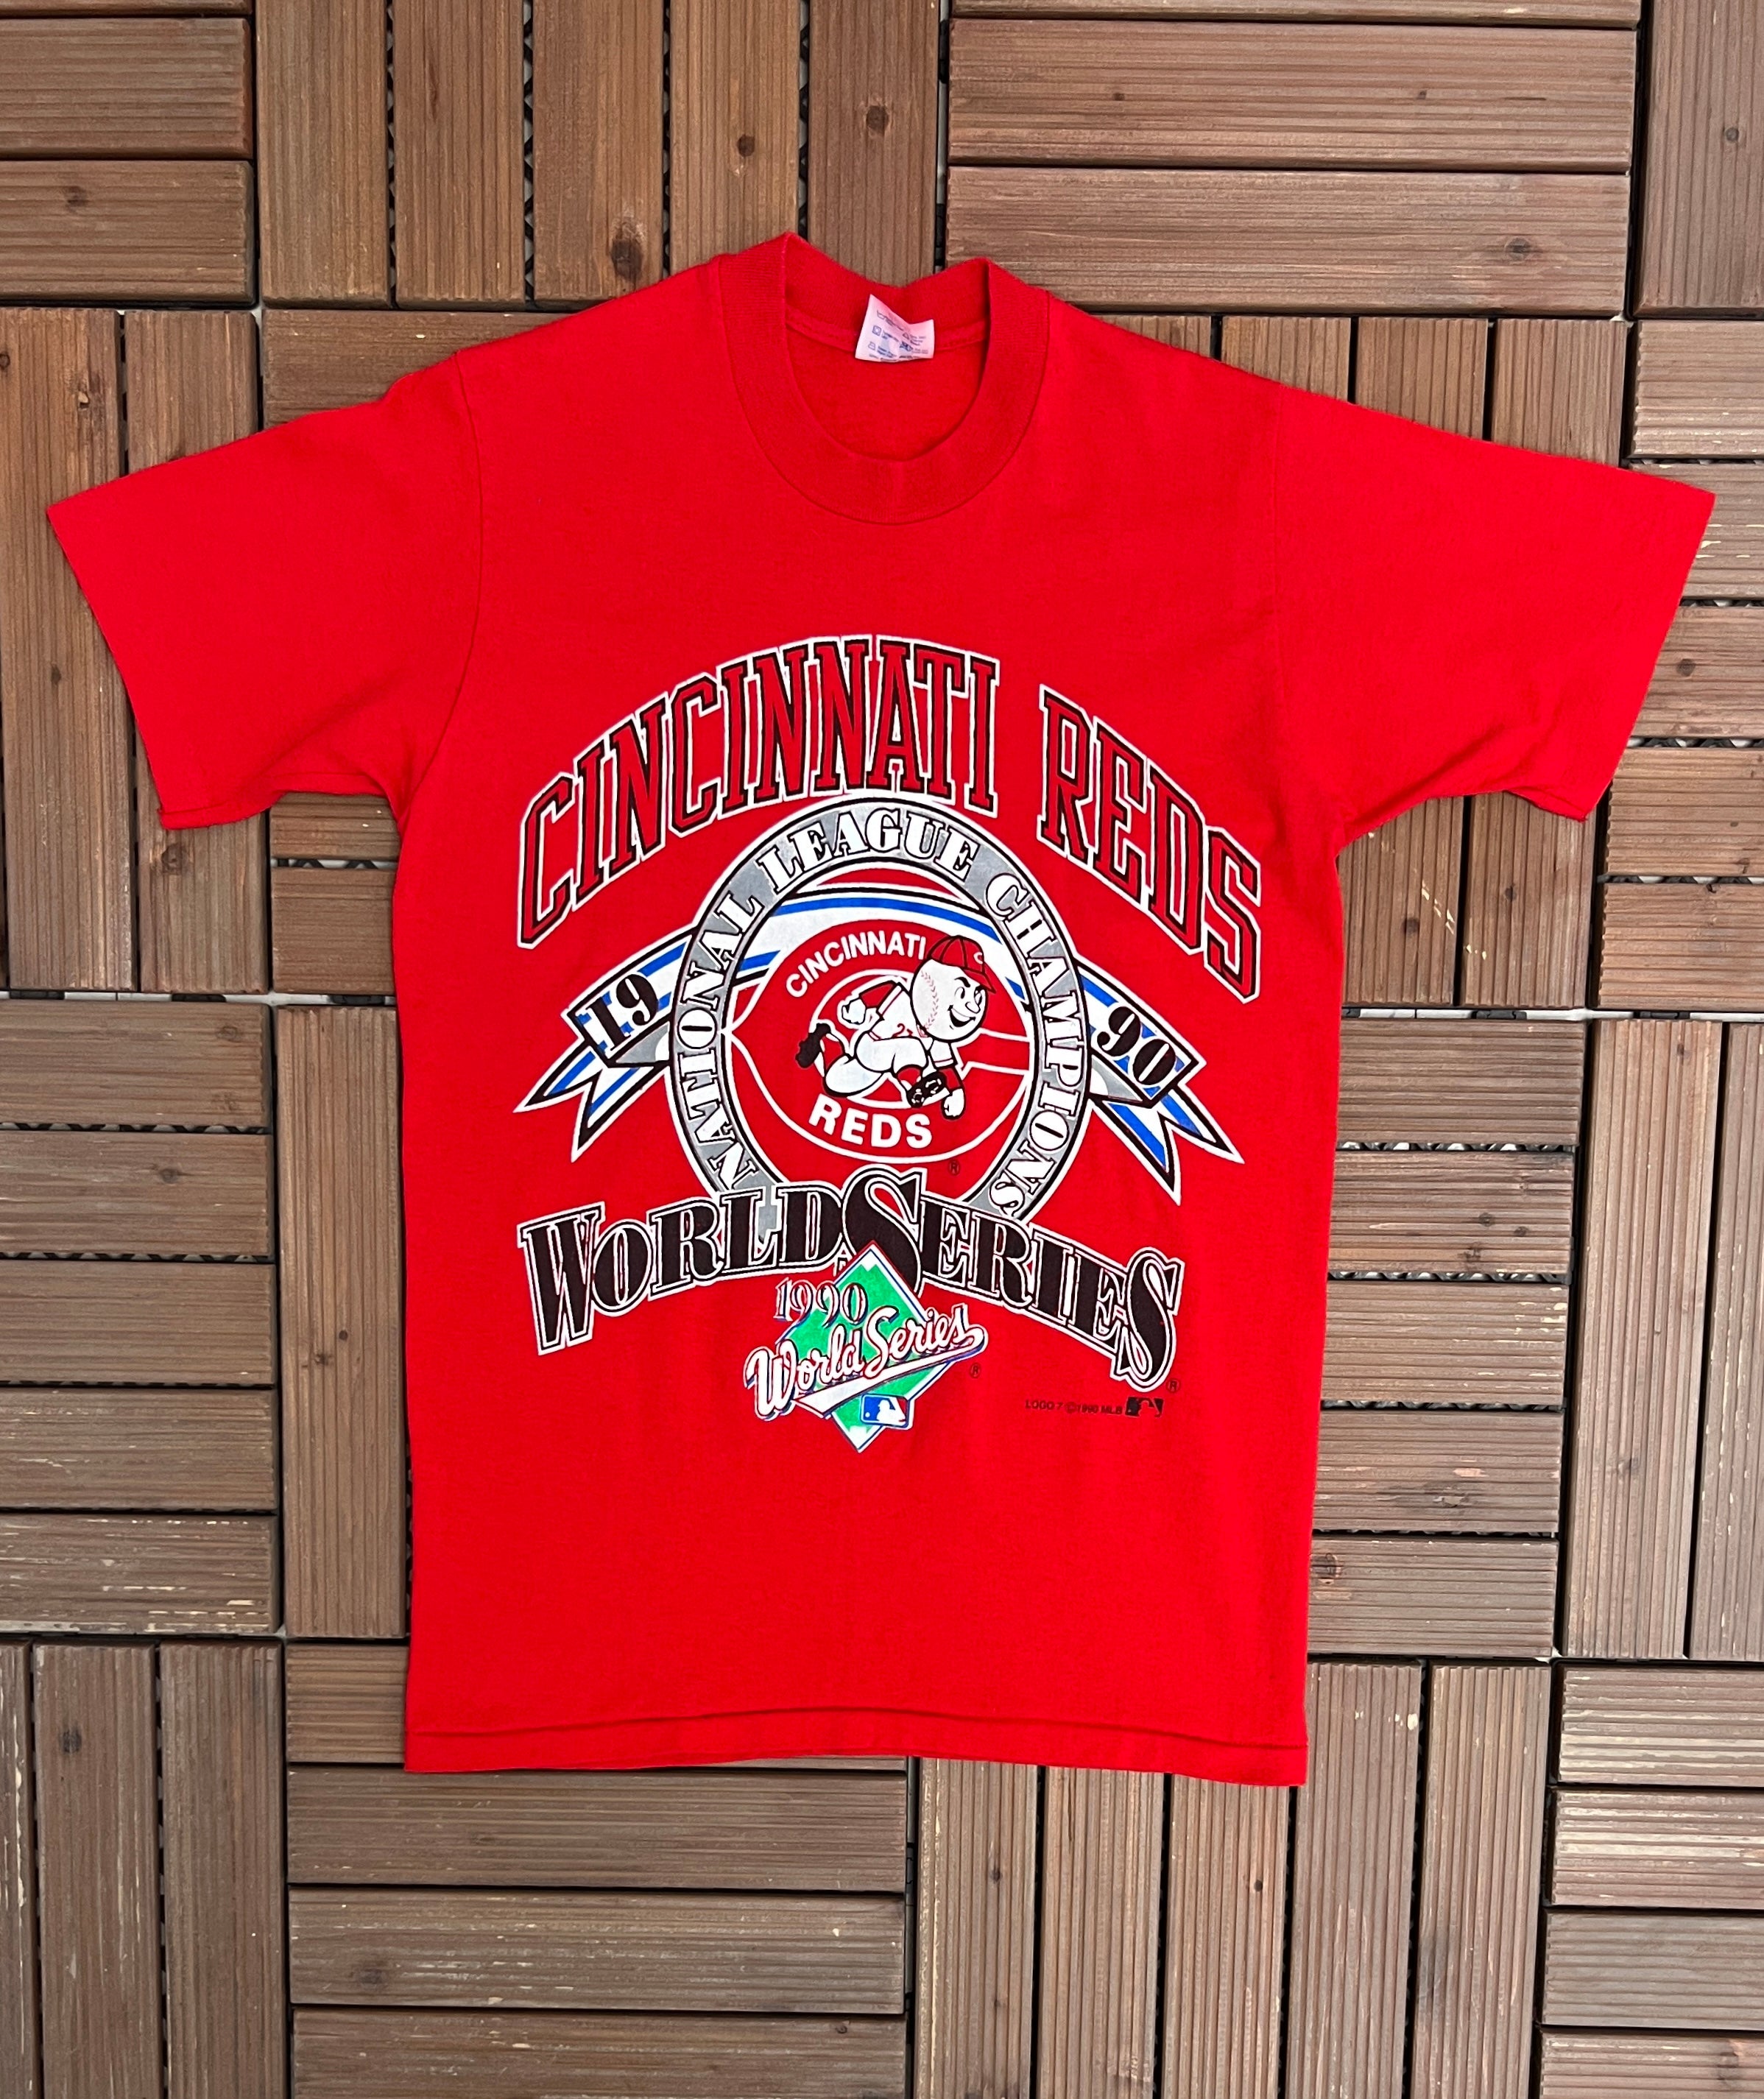 LegacyVintage99 Vintage Cincinnati Reds 1990 World Champions T Shirt Tee Trench Medium Made USA MLB Ohio Cleveland 1990s World Series New with Tags Large